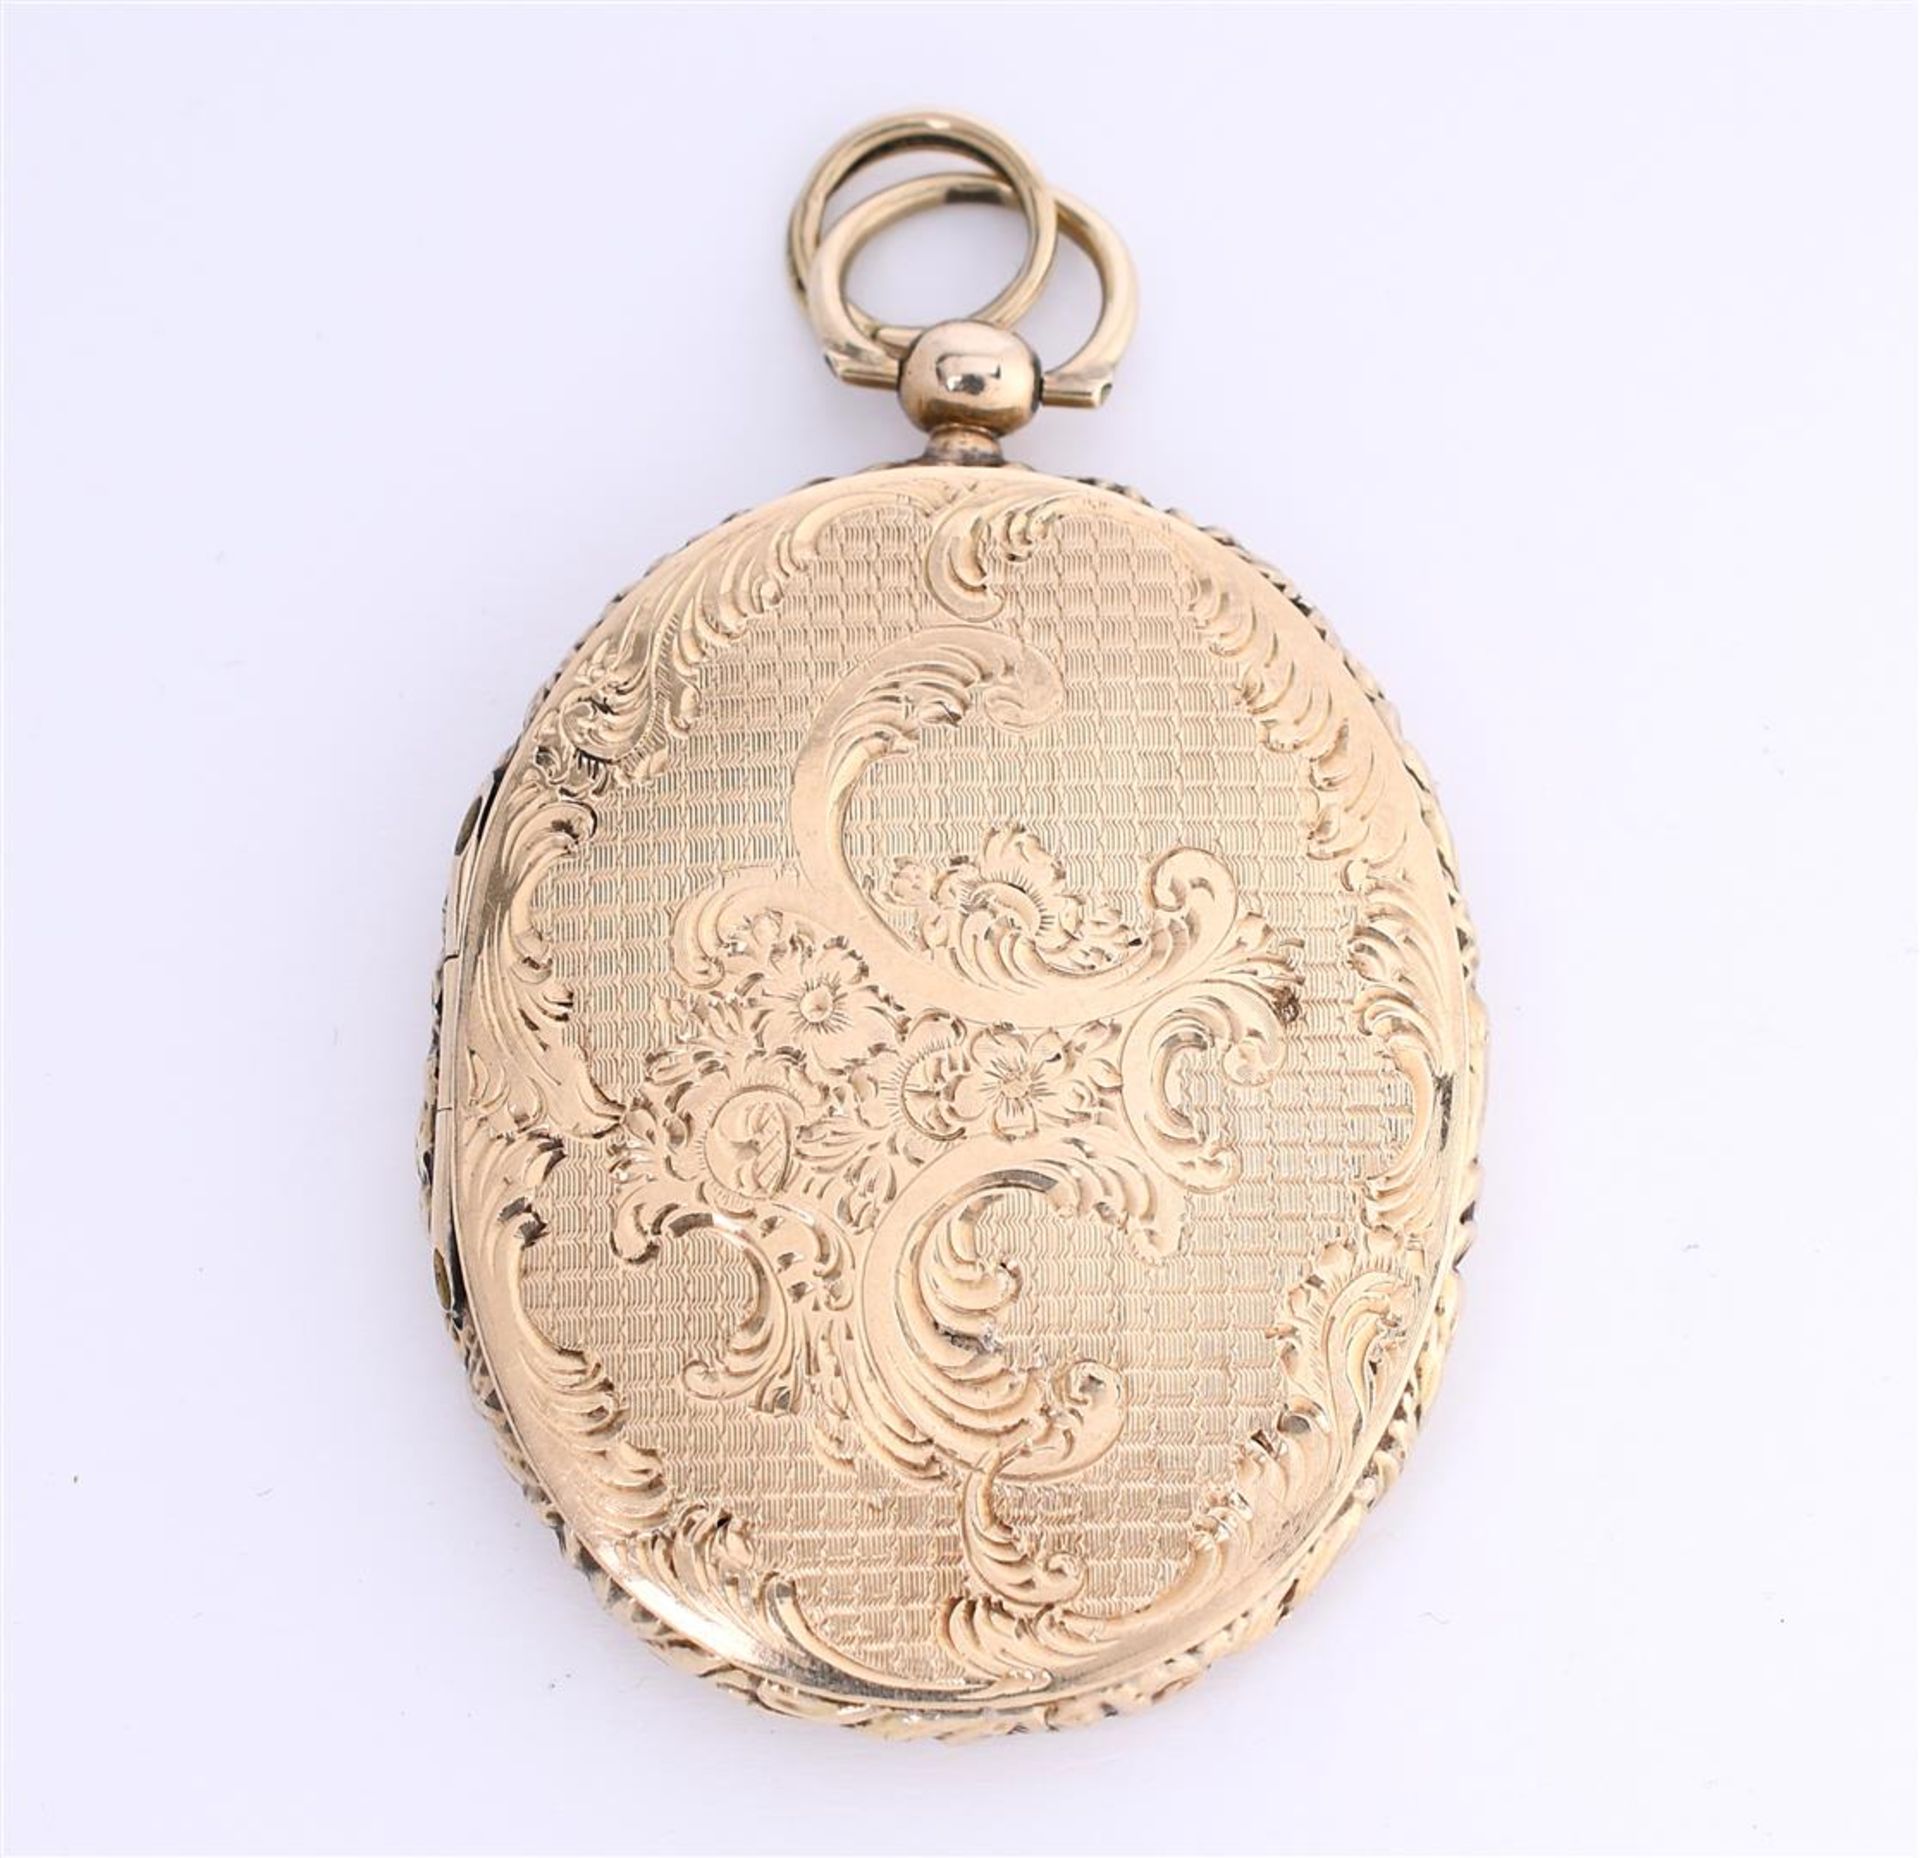 14 kt yellow gold amulet / medallion with engraving of St. Peter's Basilica in Rome - Image 2 of 4